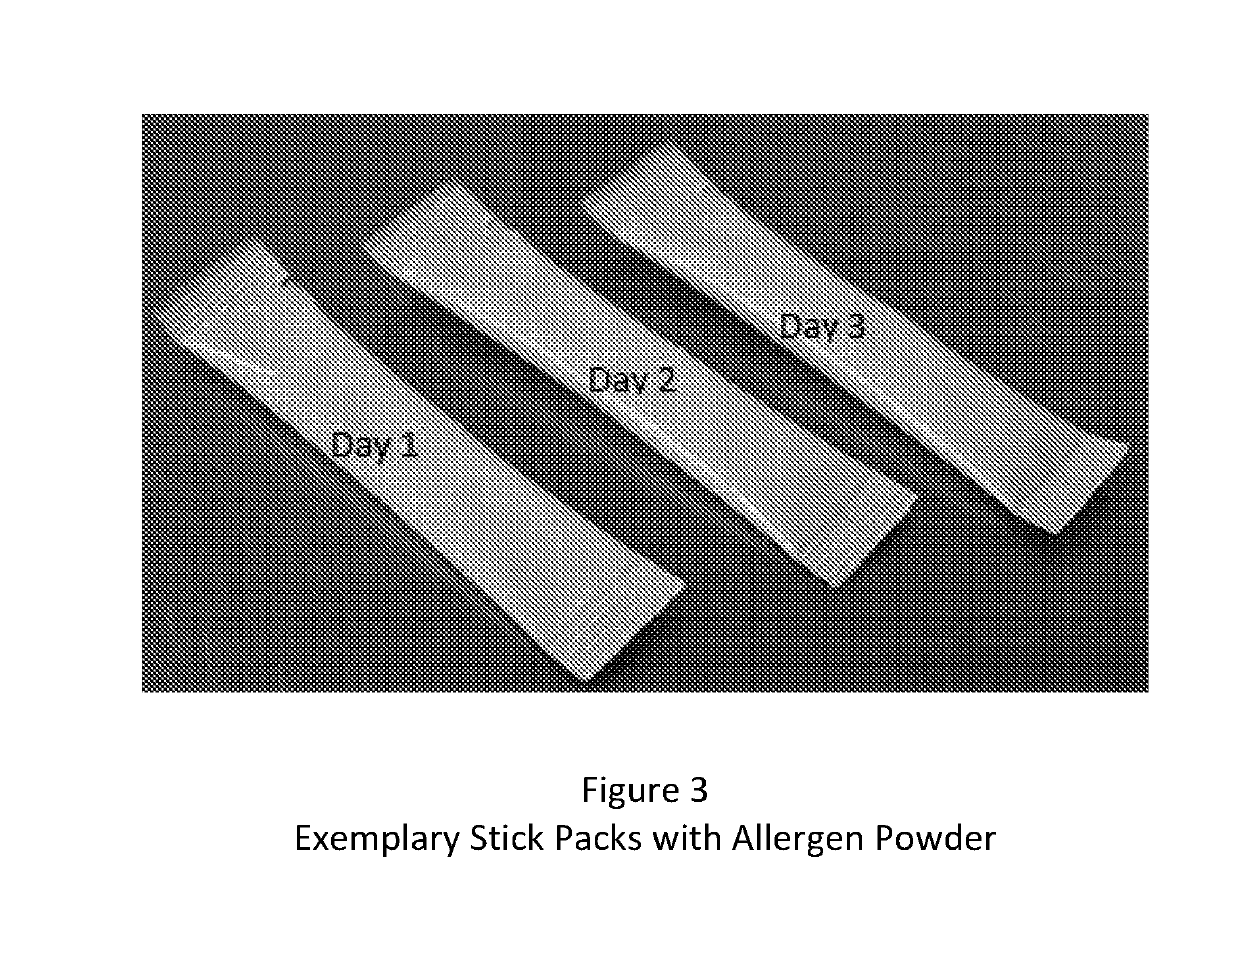 Composition and method for reducing allergic response